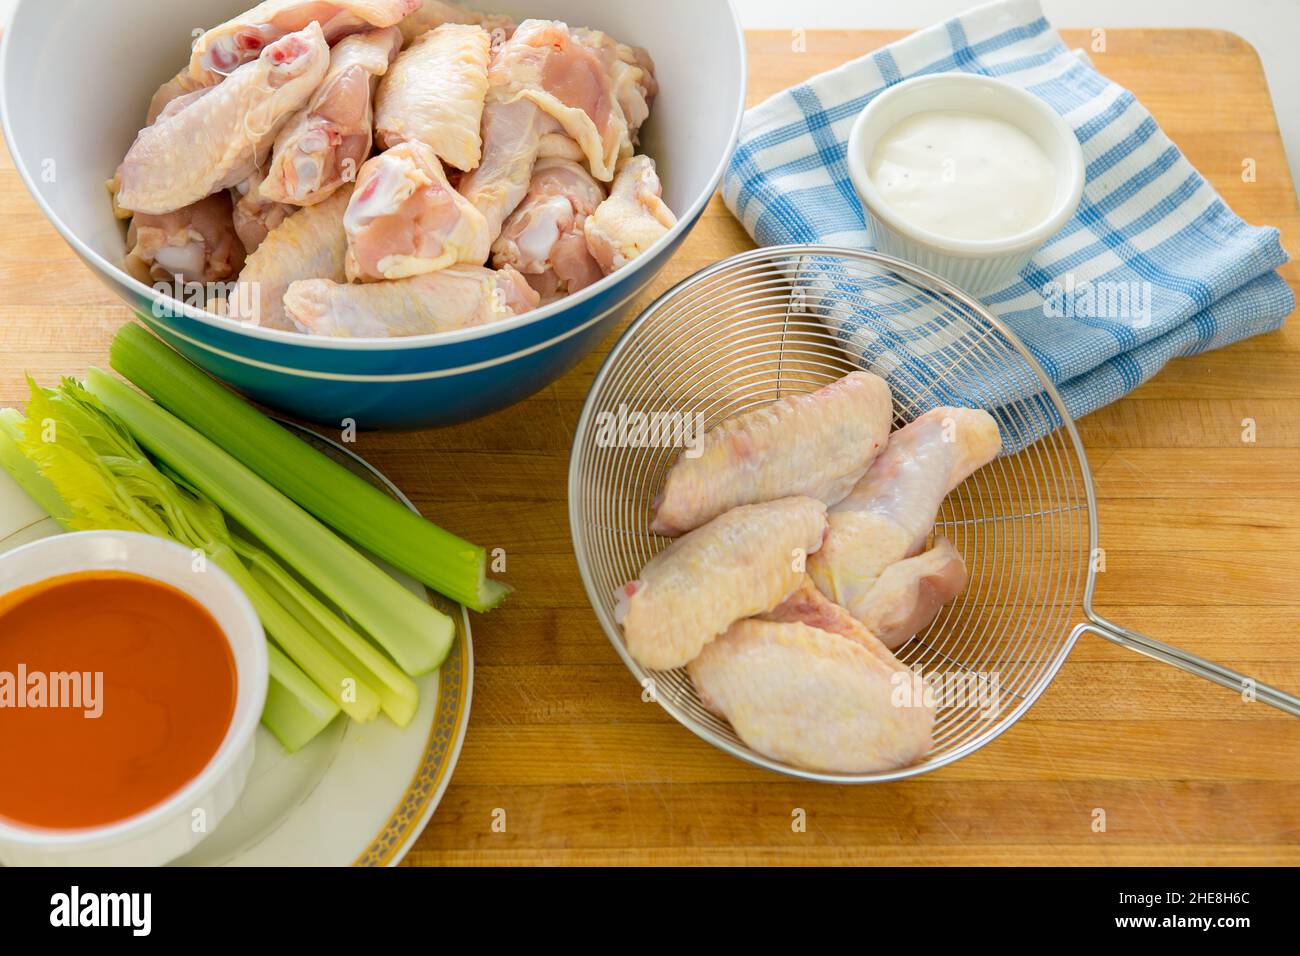 Fresh raw Chicken wings ready for deep frying with a strainer , hot sauce , blue cheese sauce and celery on a wooden cutting board in a home kitchen Stock Photo